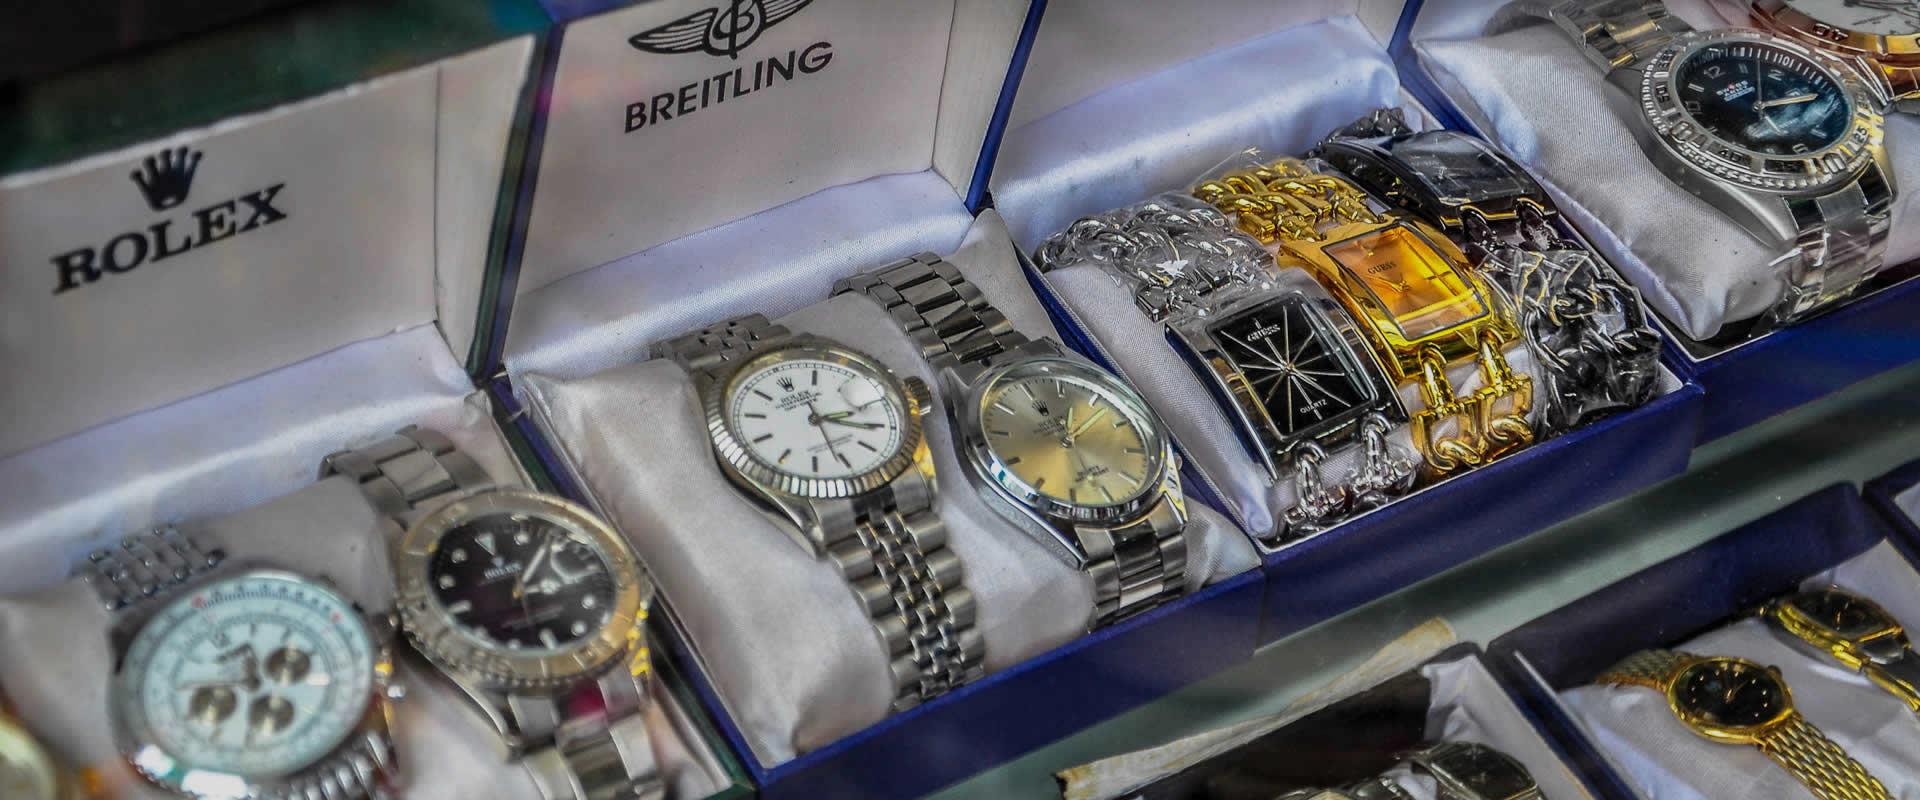 Fake Rollex and Breitlinkg watches sold by counterfeiters